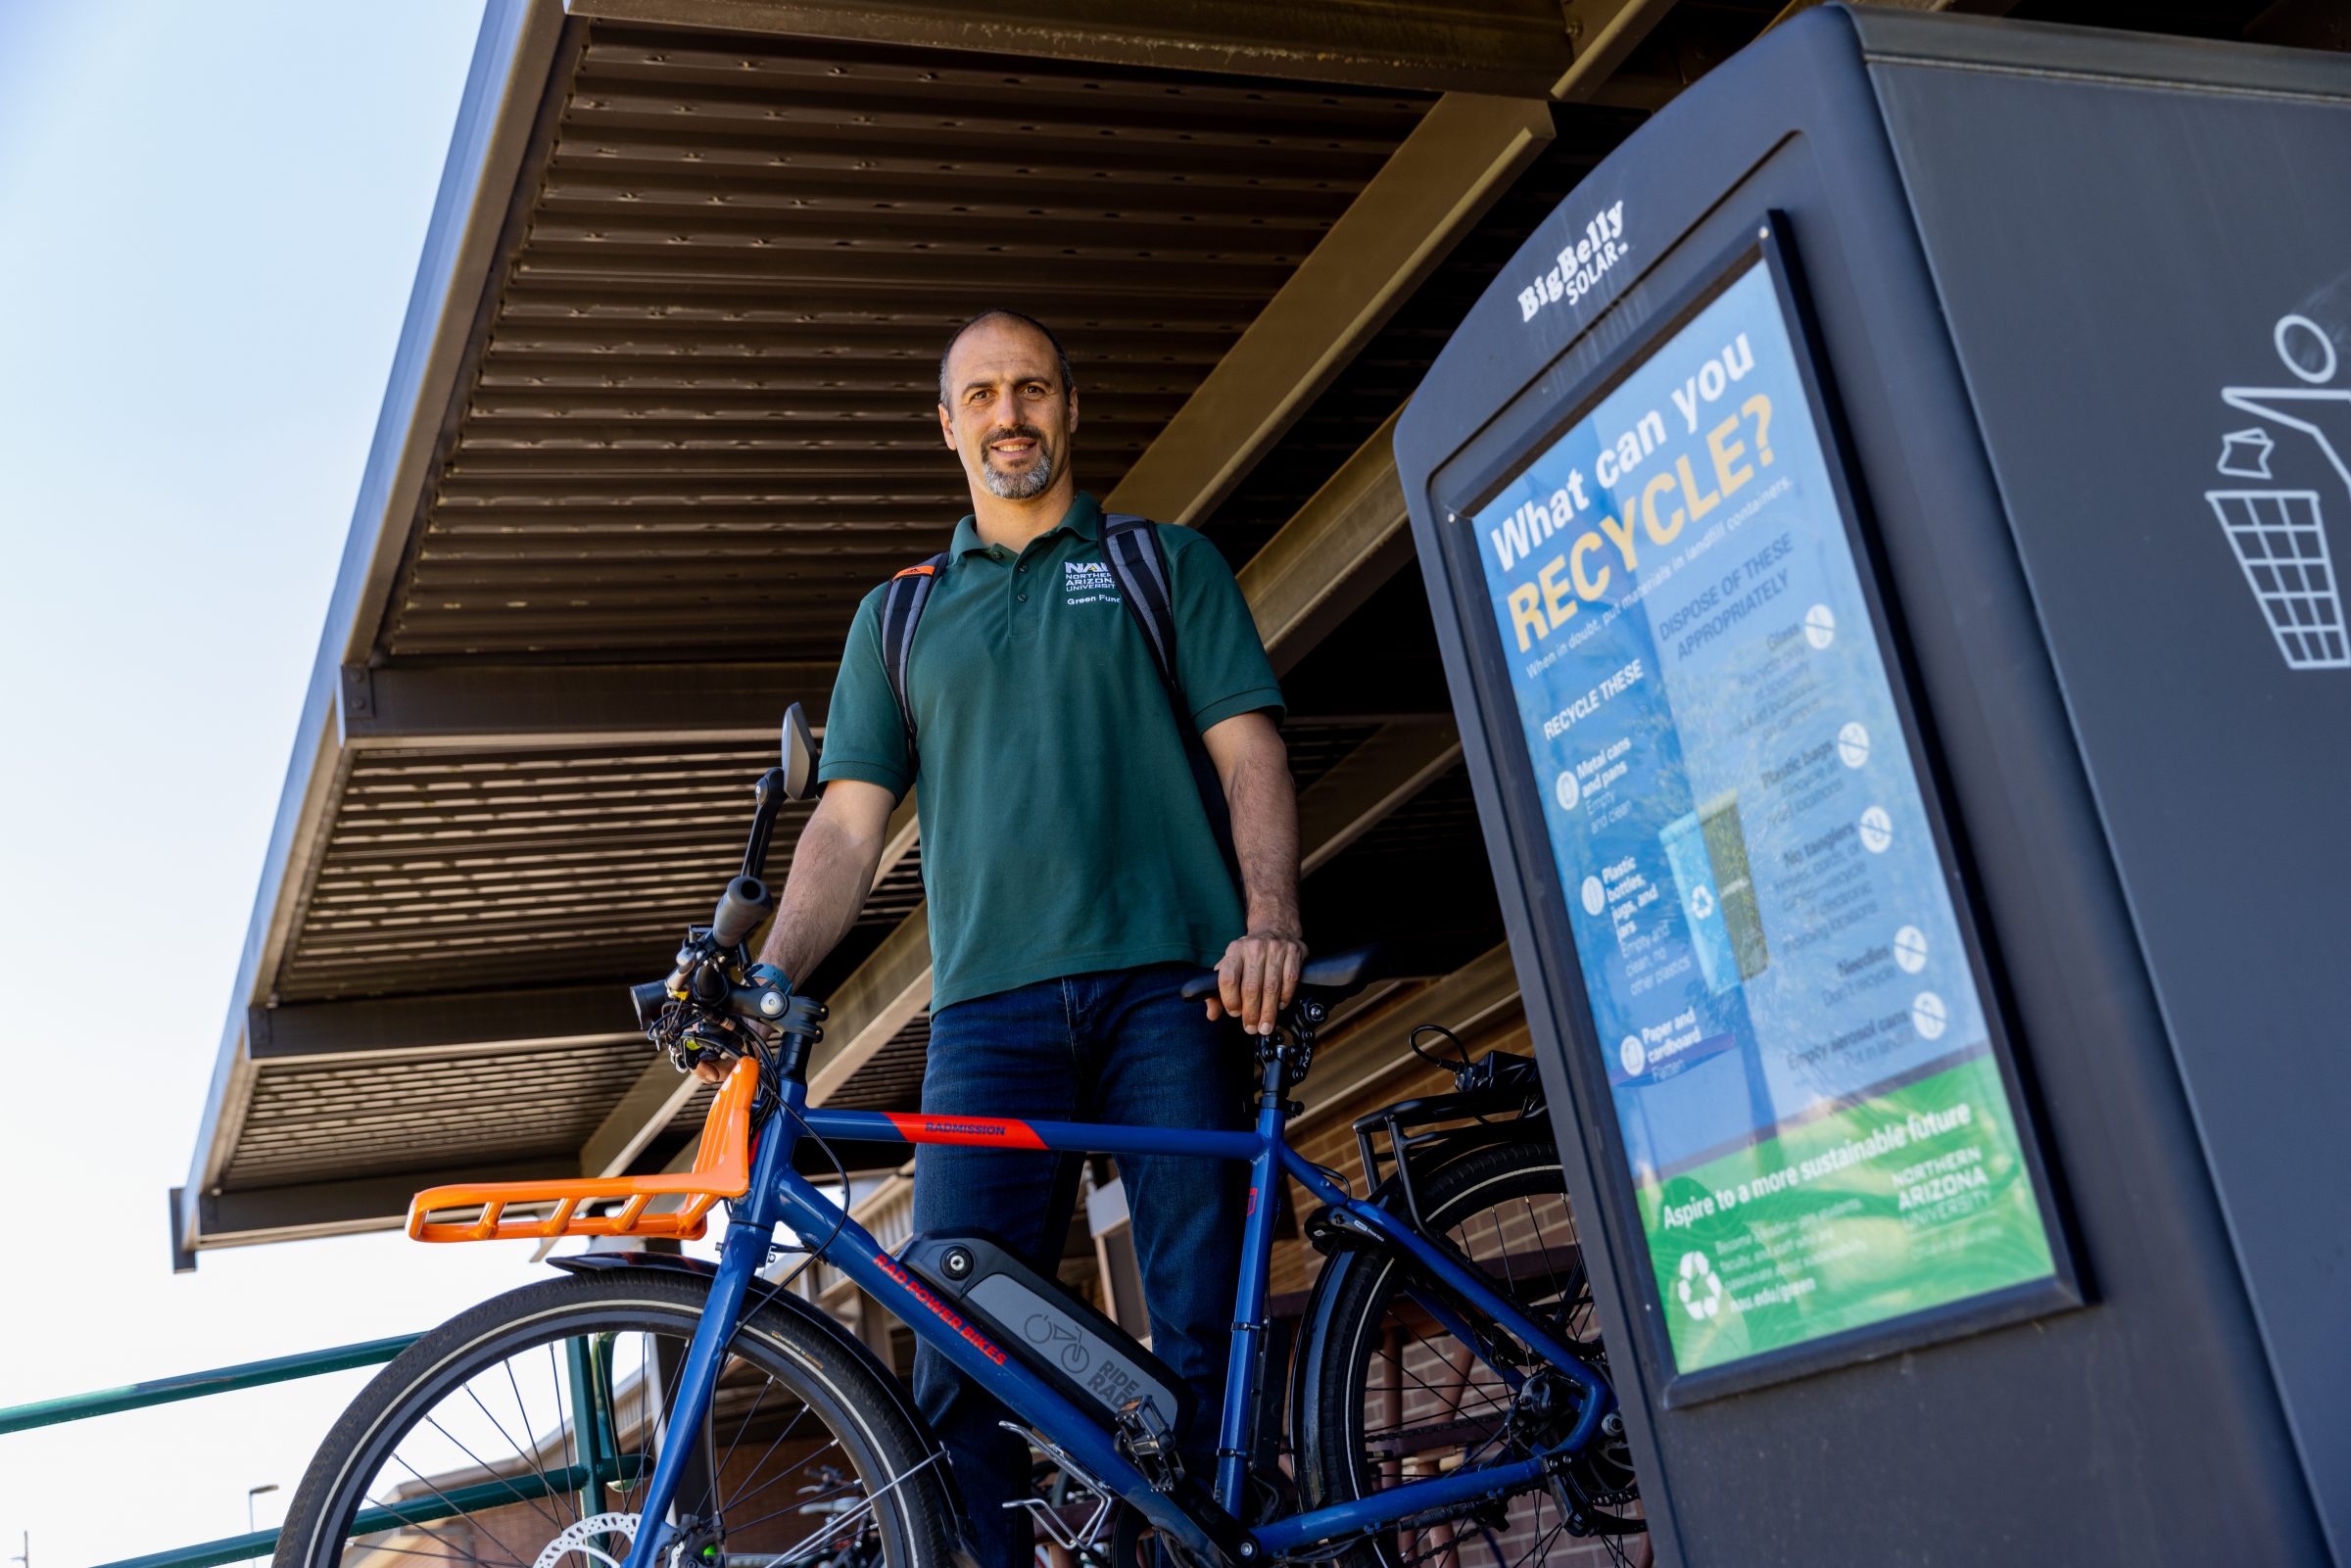 Avi Henn standing with e-bike next to recycling container.